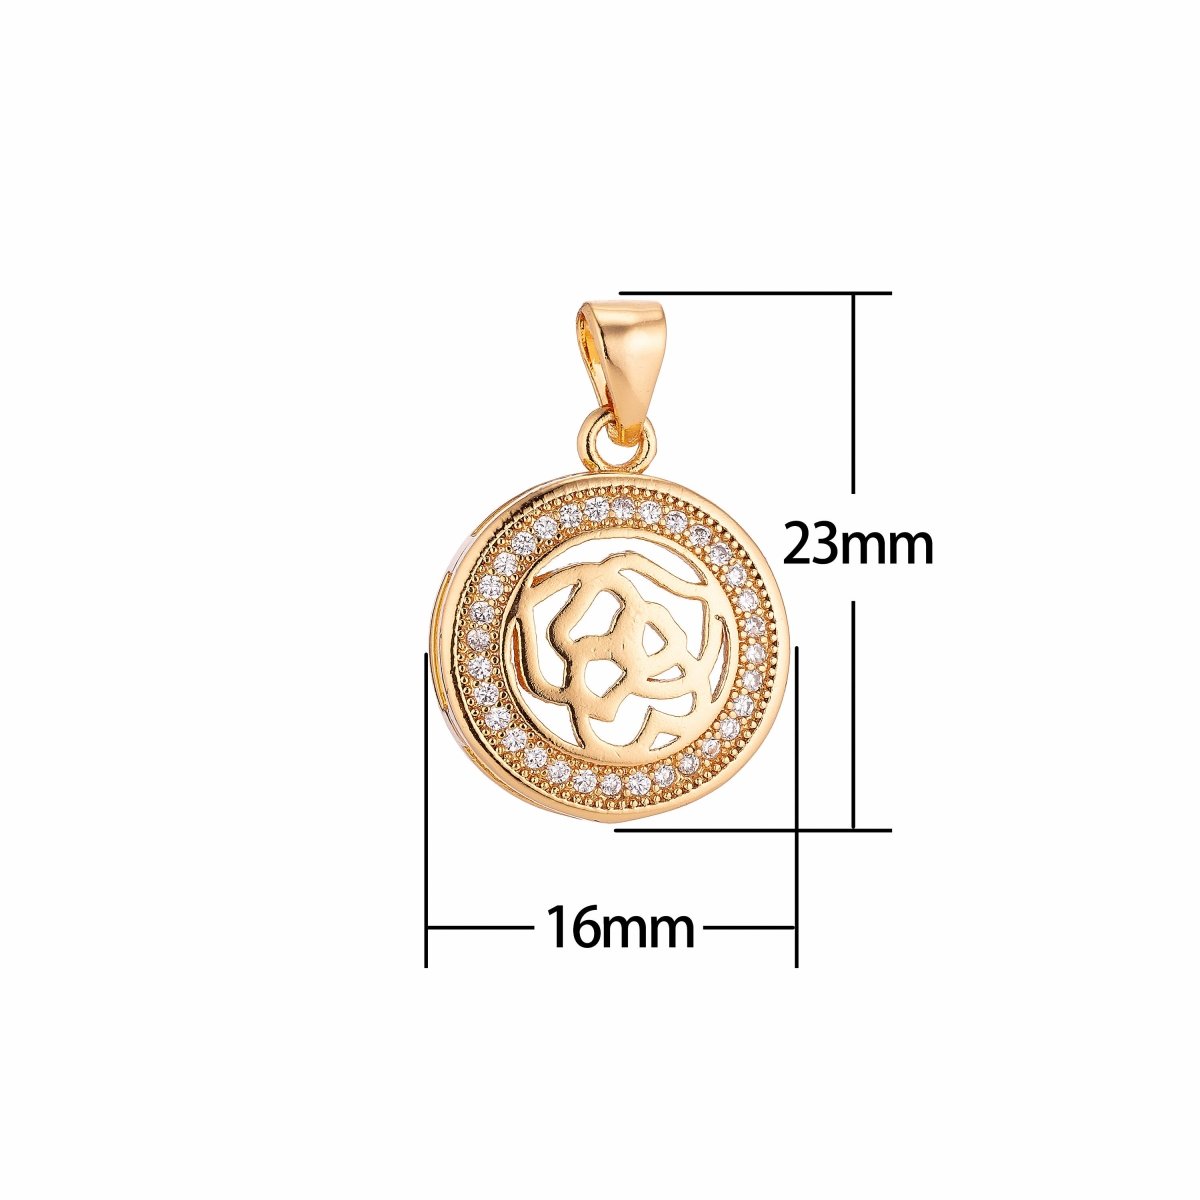 On Sale! CLEARANCE! Abstract Flower in White Gold / Gold Filled Coin Medallion Charm Pendant Cubic Zircon CZ Dainty Pendant for Necklace Jewelry Making, CL-H277 - DLUXCA